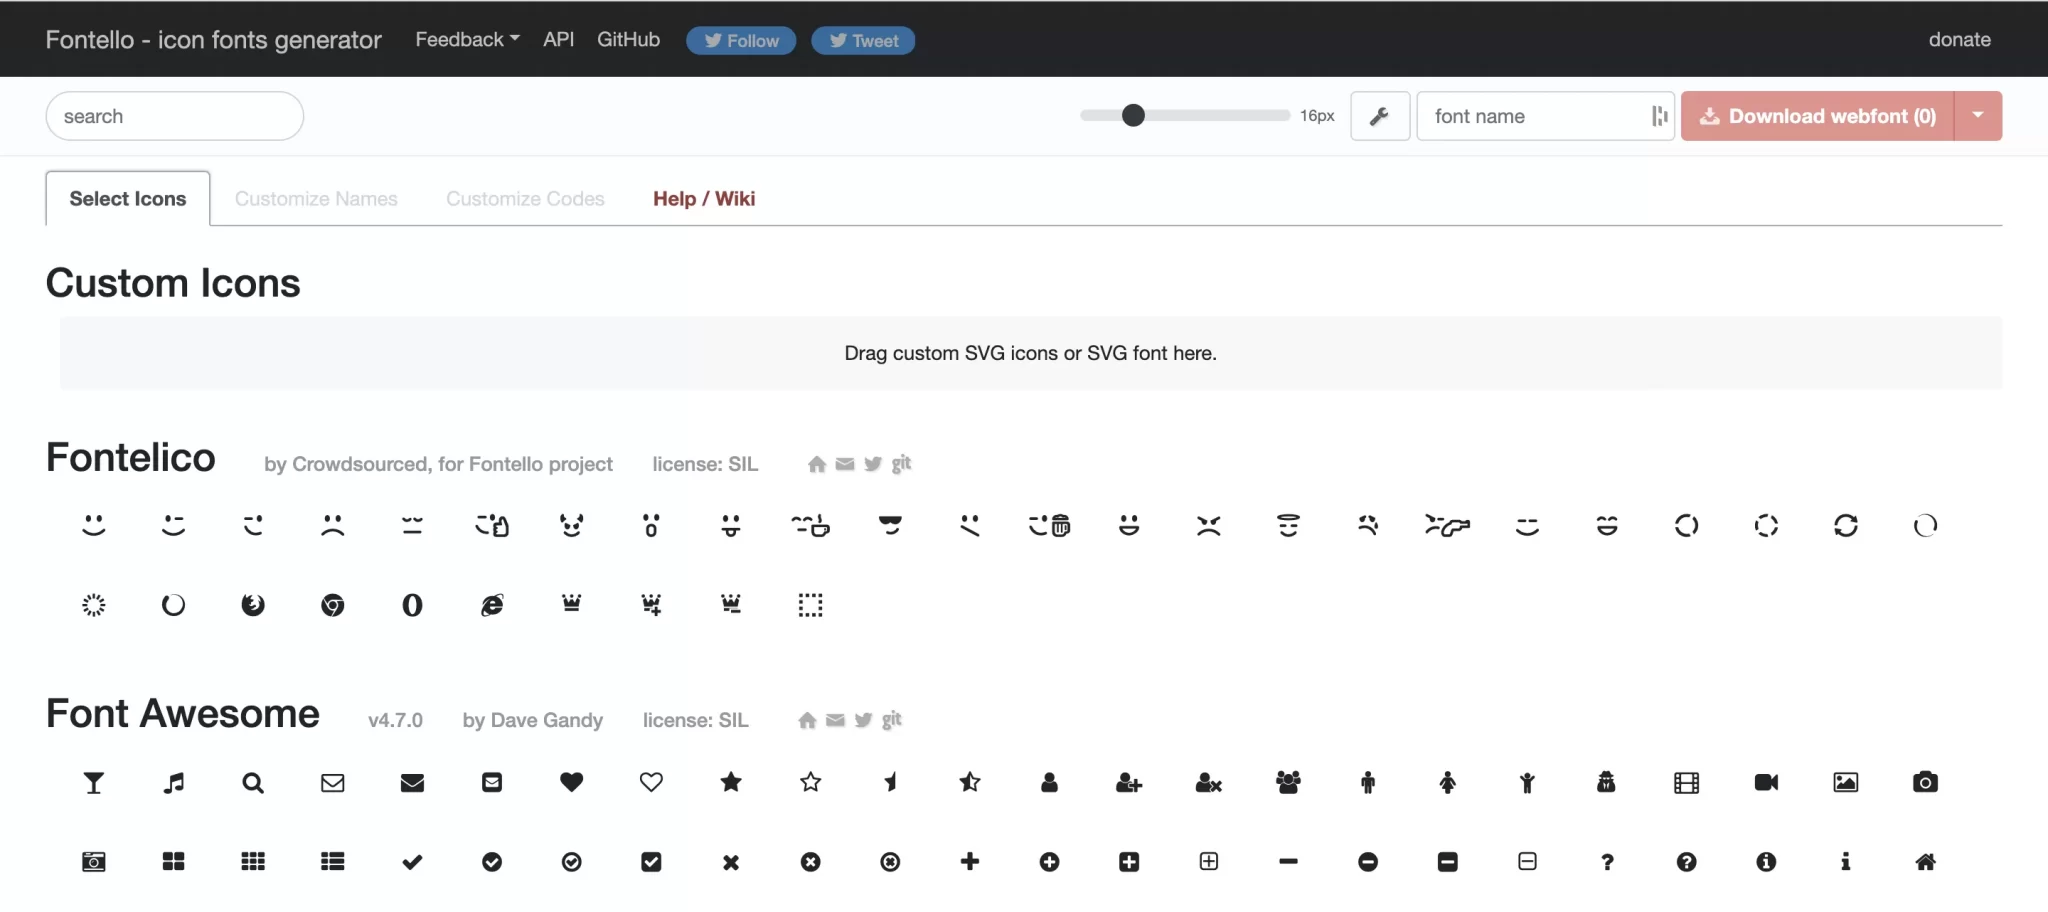 Fontello is a tool to generate a custom icon font to embed on your WordPress site.